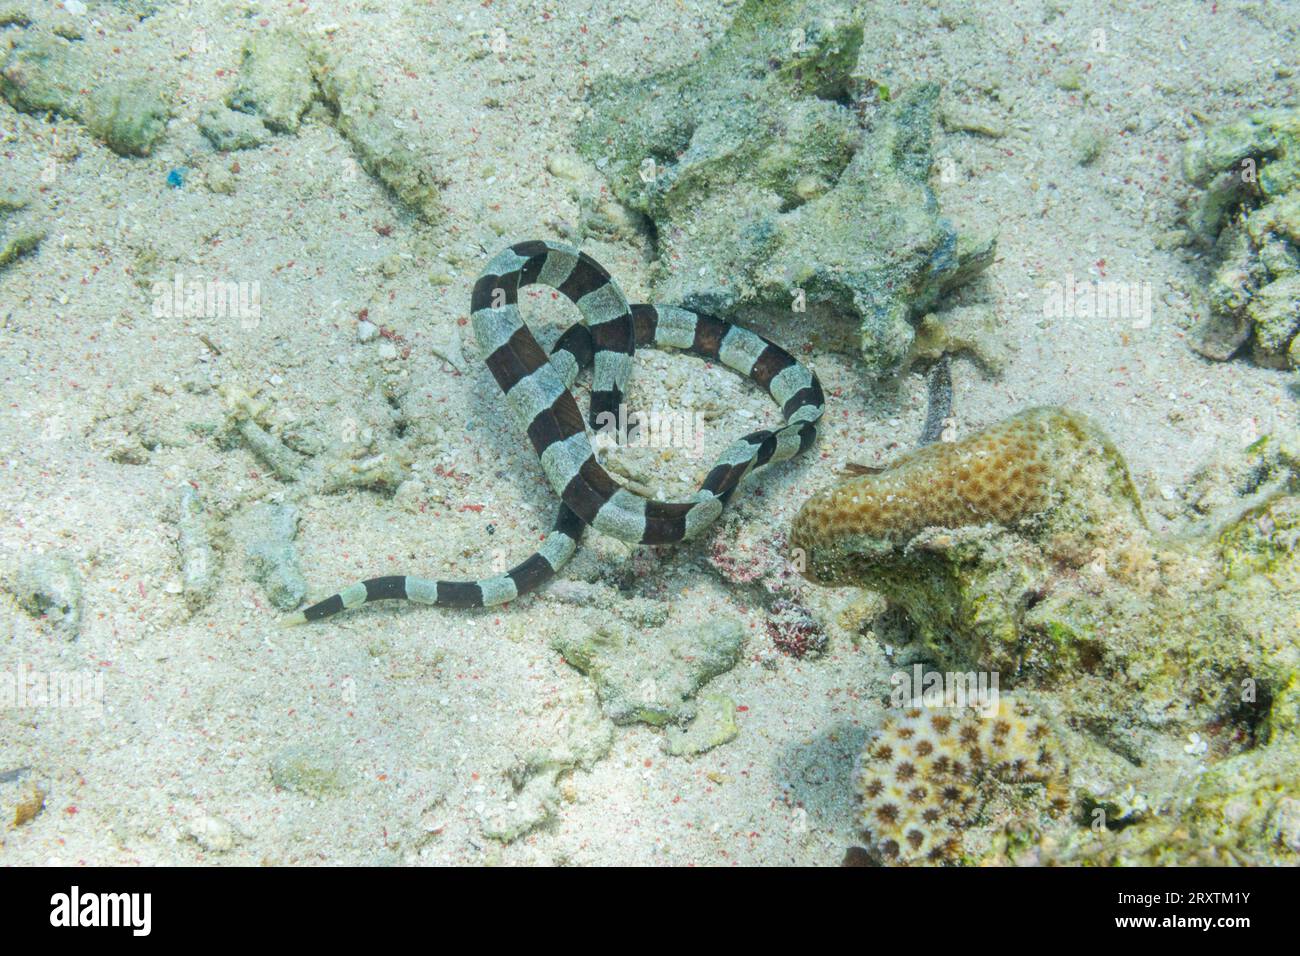 An adult Harlequin snake eel (Myrichthys colobrinus), hunting off Bangka Island, off the northeastern tip of Sulawesi, Indonesia, Southeast Asia, Asia Stock Photo